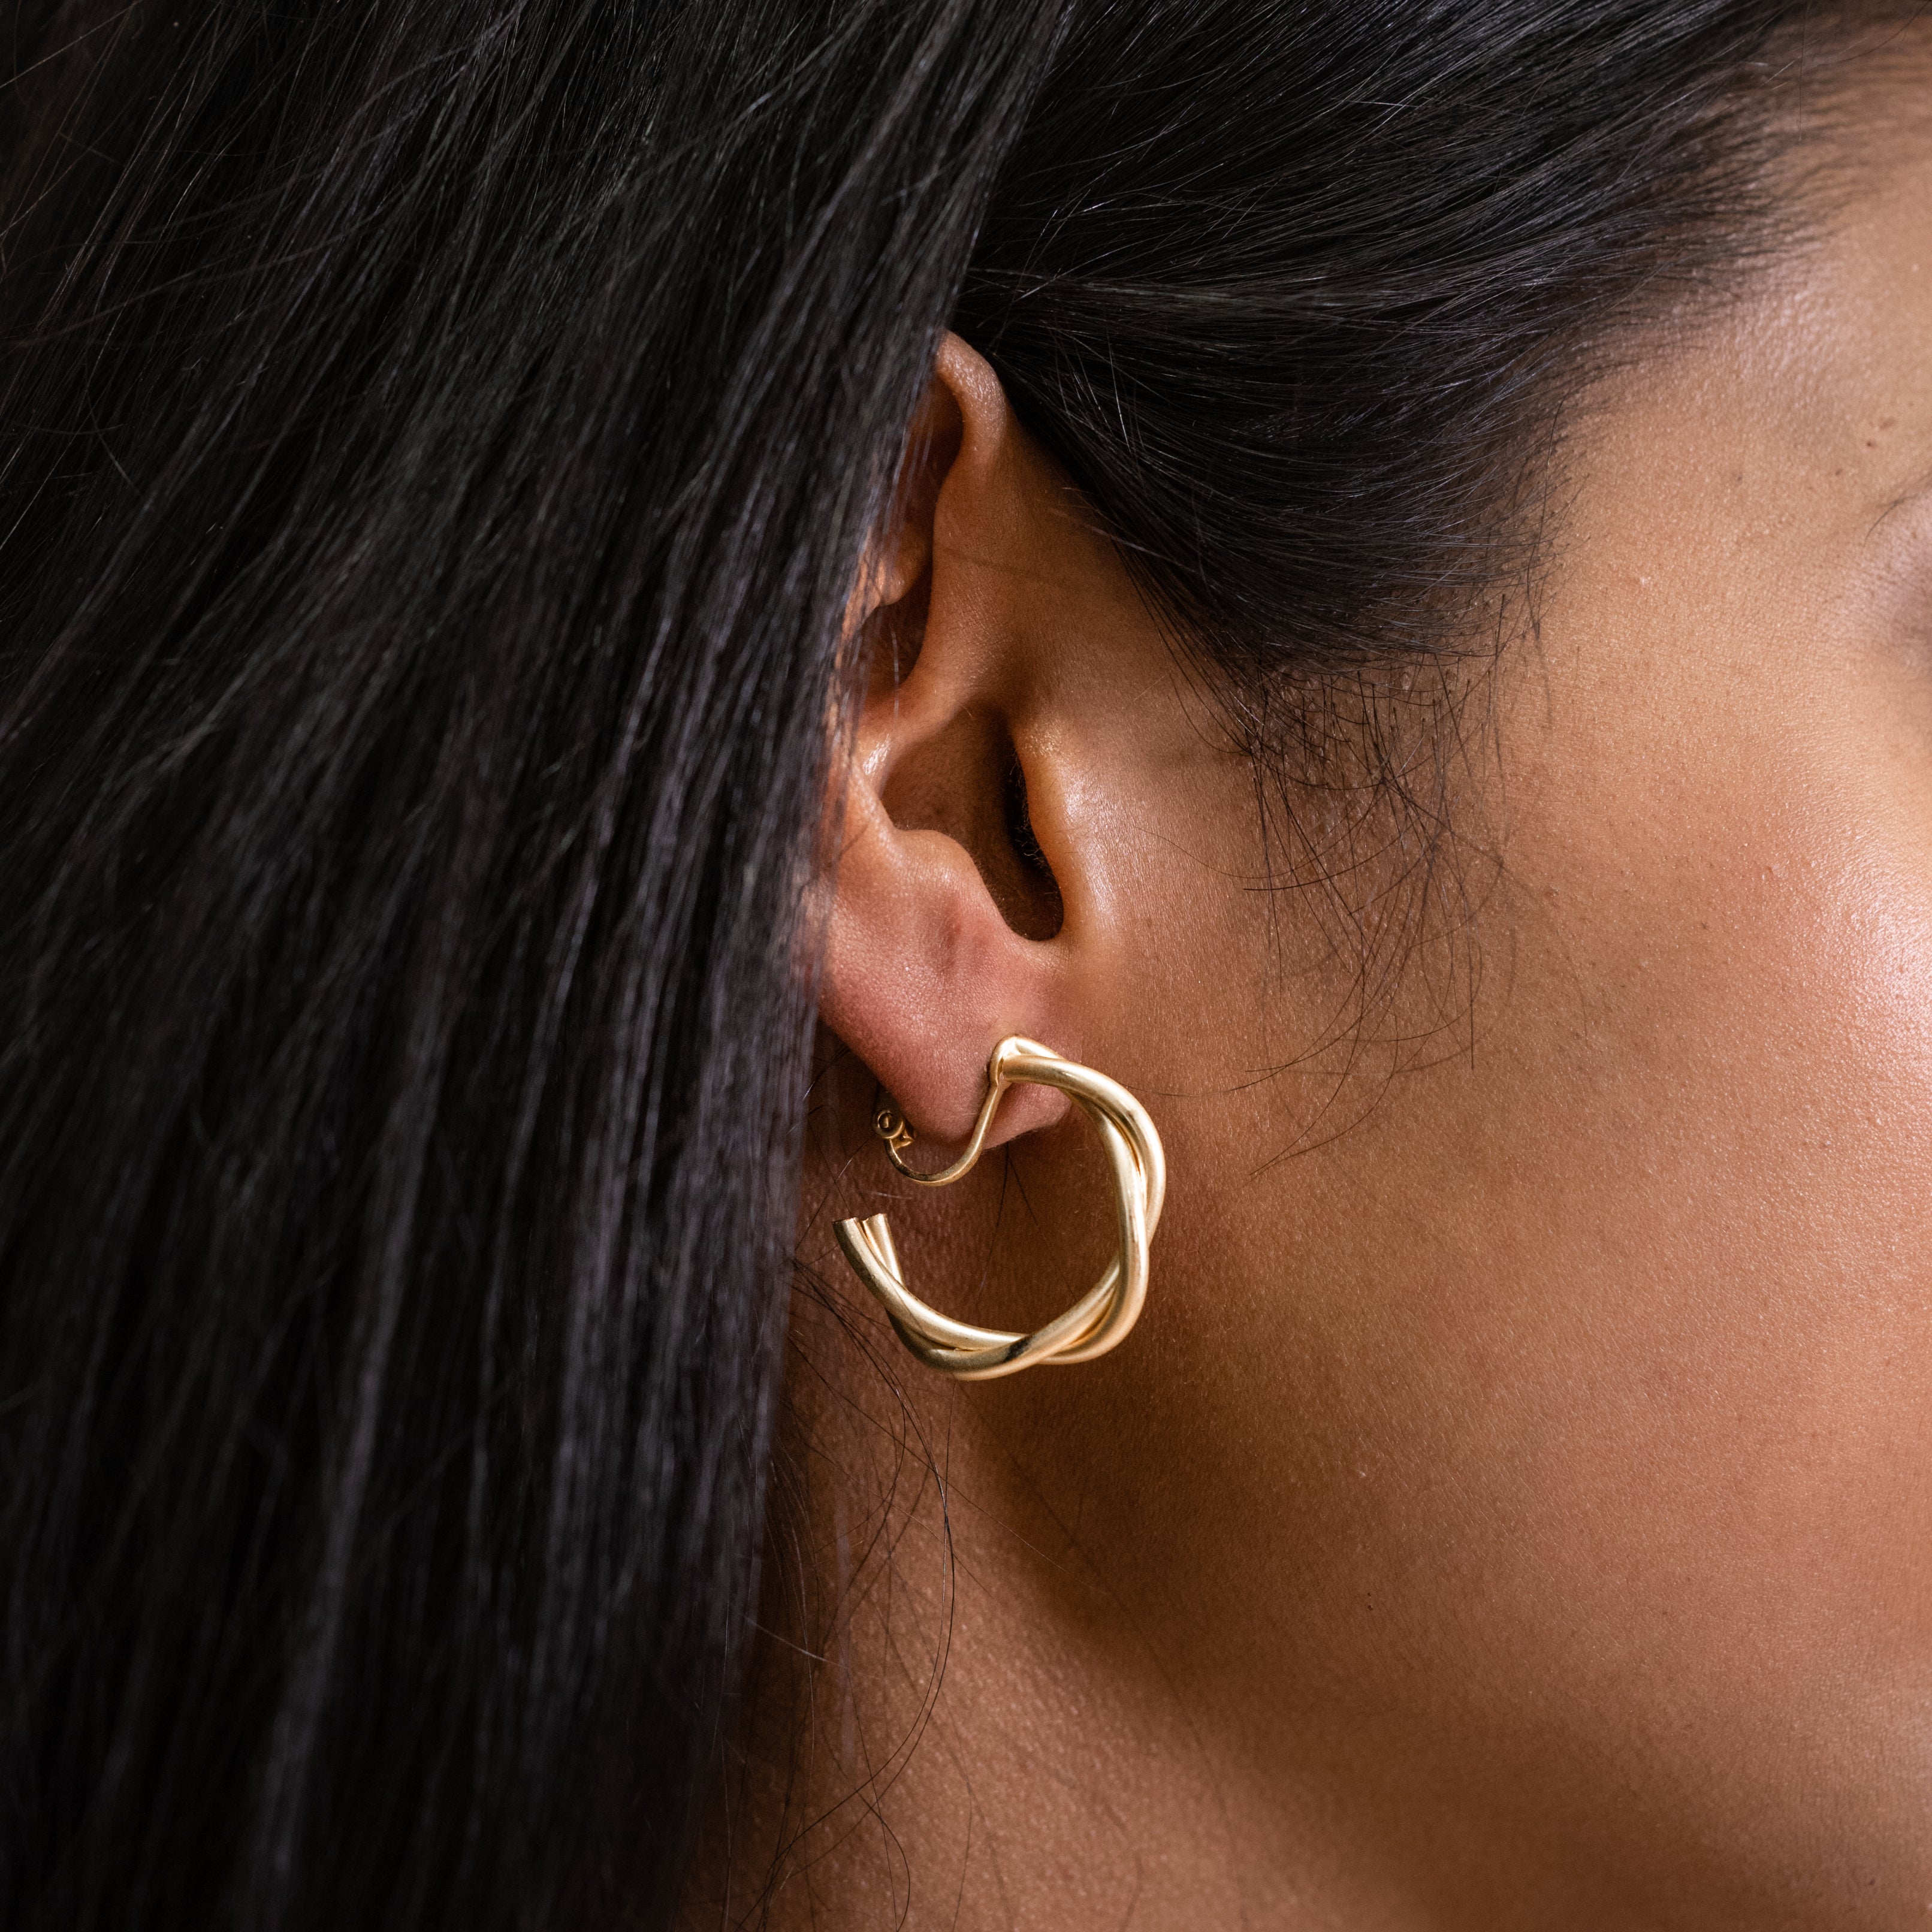 A model wearing the Twist Hoop Earrings feature a secure and comfortable screwback clip-on closure ideal for all ear types. Wear these earrings for up to 8-12 hours per day with a secure hold and the ability to be manually adjusted to the individual's size. Crafted from gold tone plated copper alloy, these earrings come is a single pair.